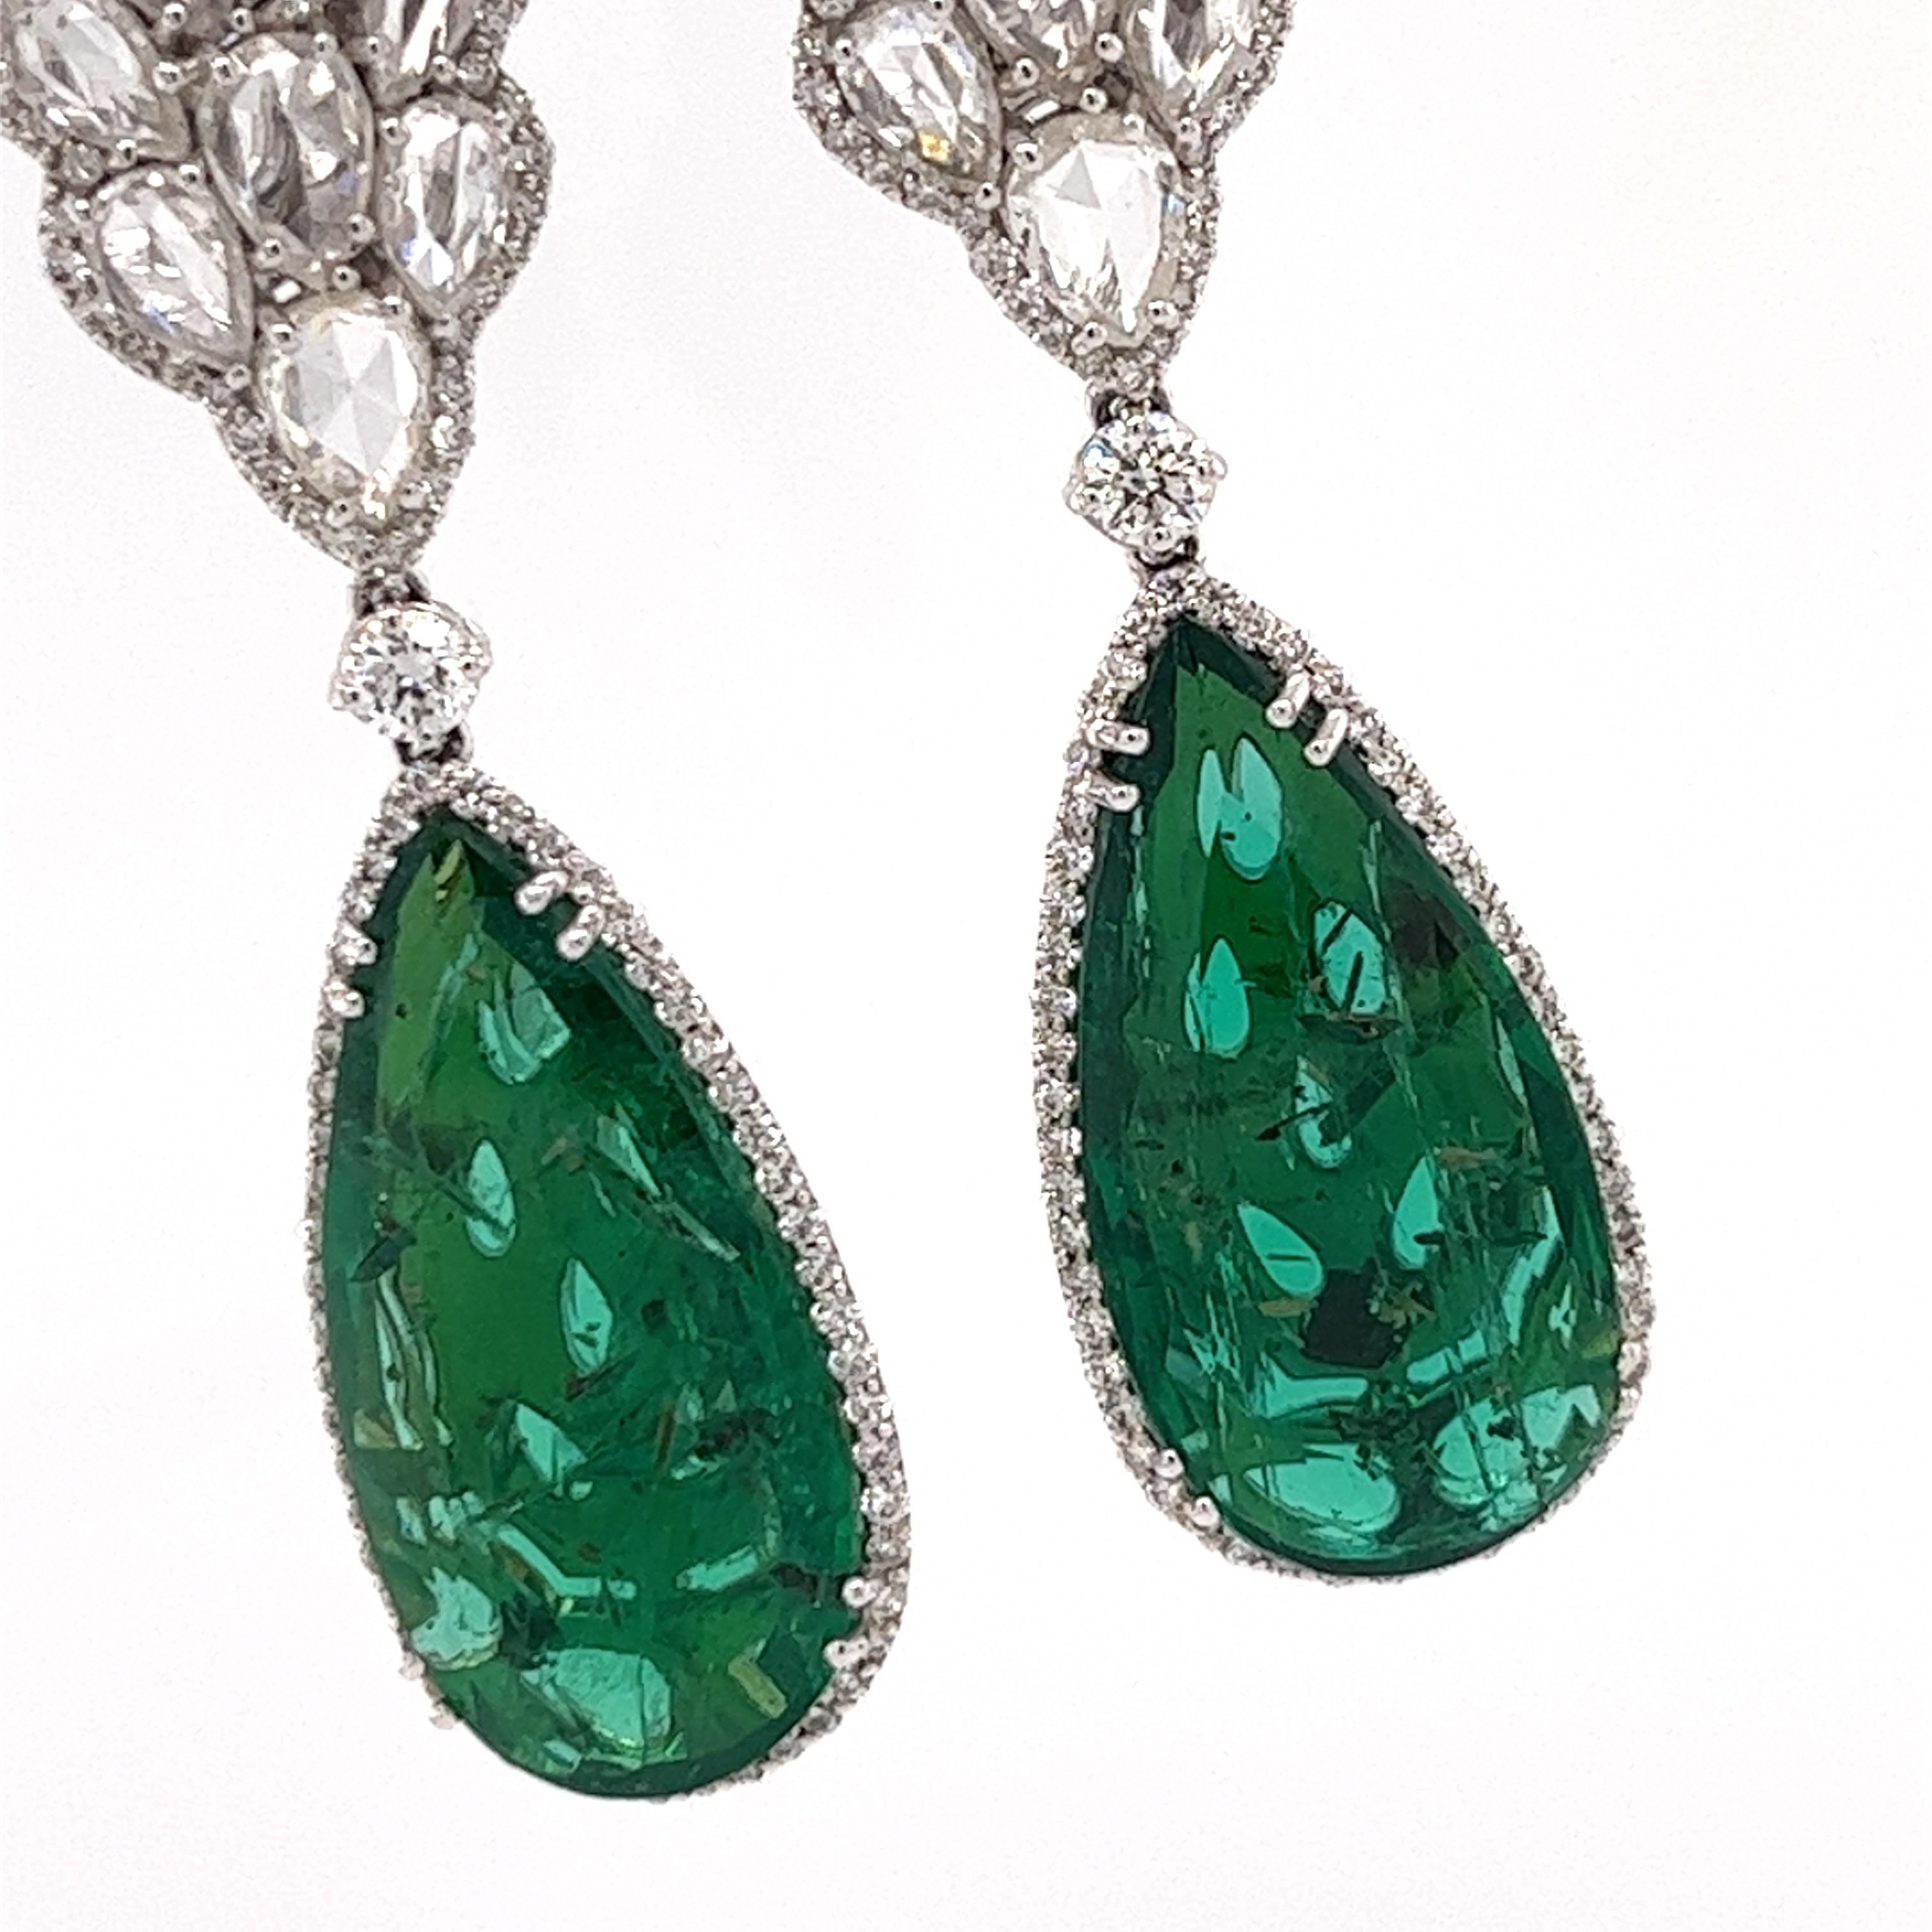 Drop Emeralds and Diamonds Earrings  18KT White Gold  GIA CERTIFIED

GIA CERTIFICATED. REPORT # 6214485271

Weight 9.60 and 9.72 Grams (GROSS)

Diamond Cut 200 PIECES, 1.13 CTS, H-G, VS

Rosecut Diamonds 30 PIECES 4.27 CTS. G-F, VS

Natural Emeralds